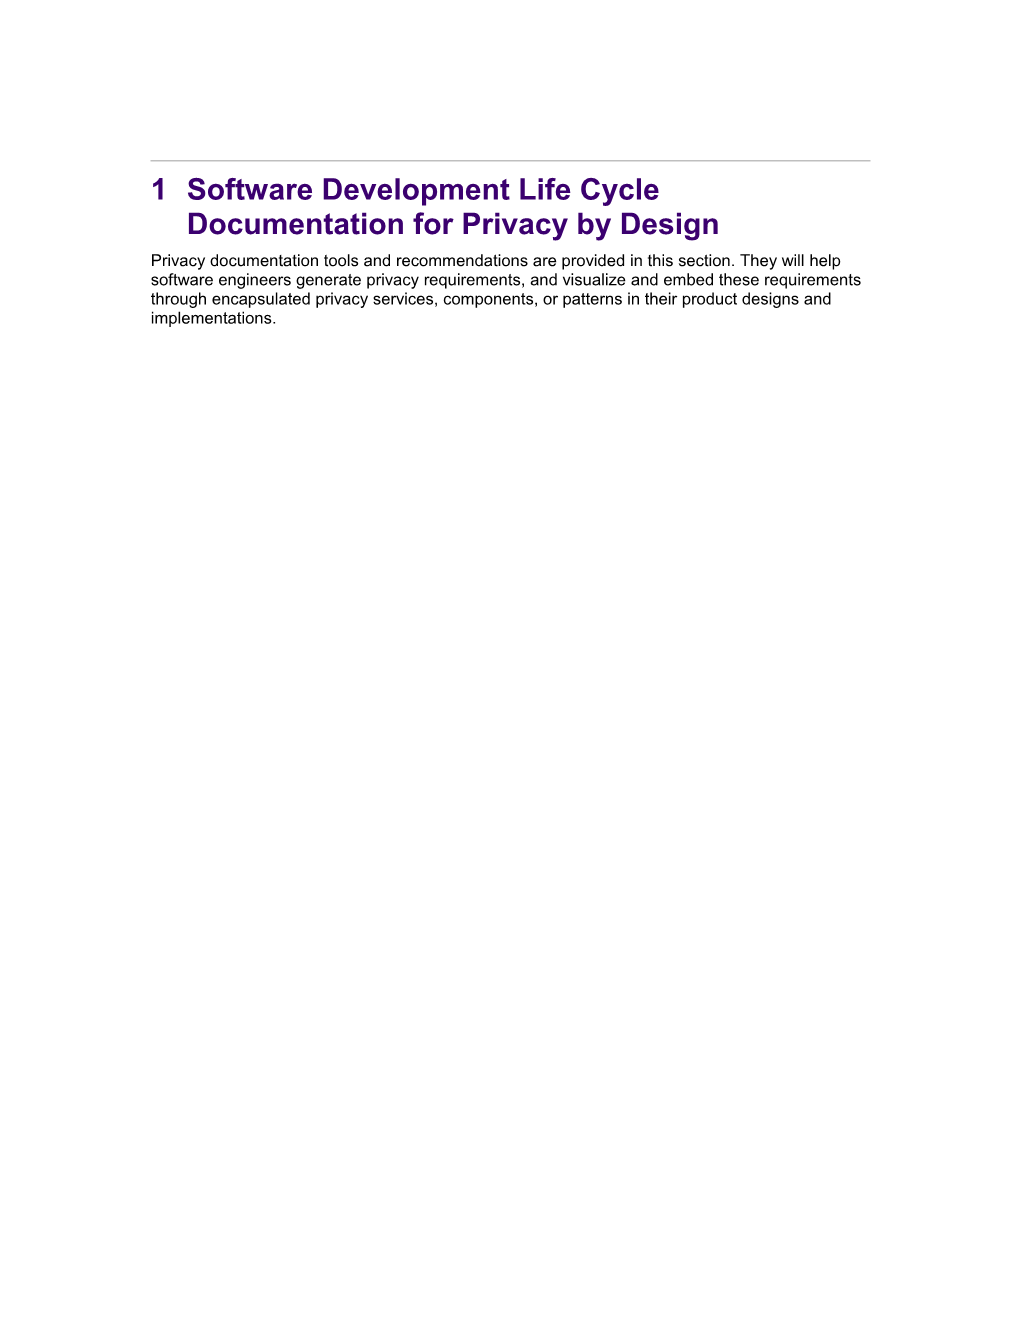 1Software Development Life Cycle Documentation for Privacy by Design